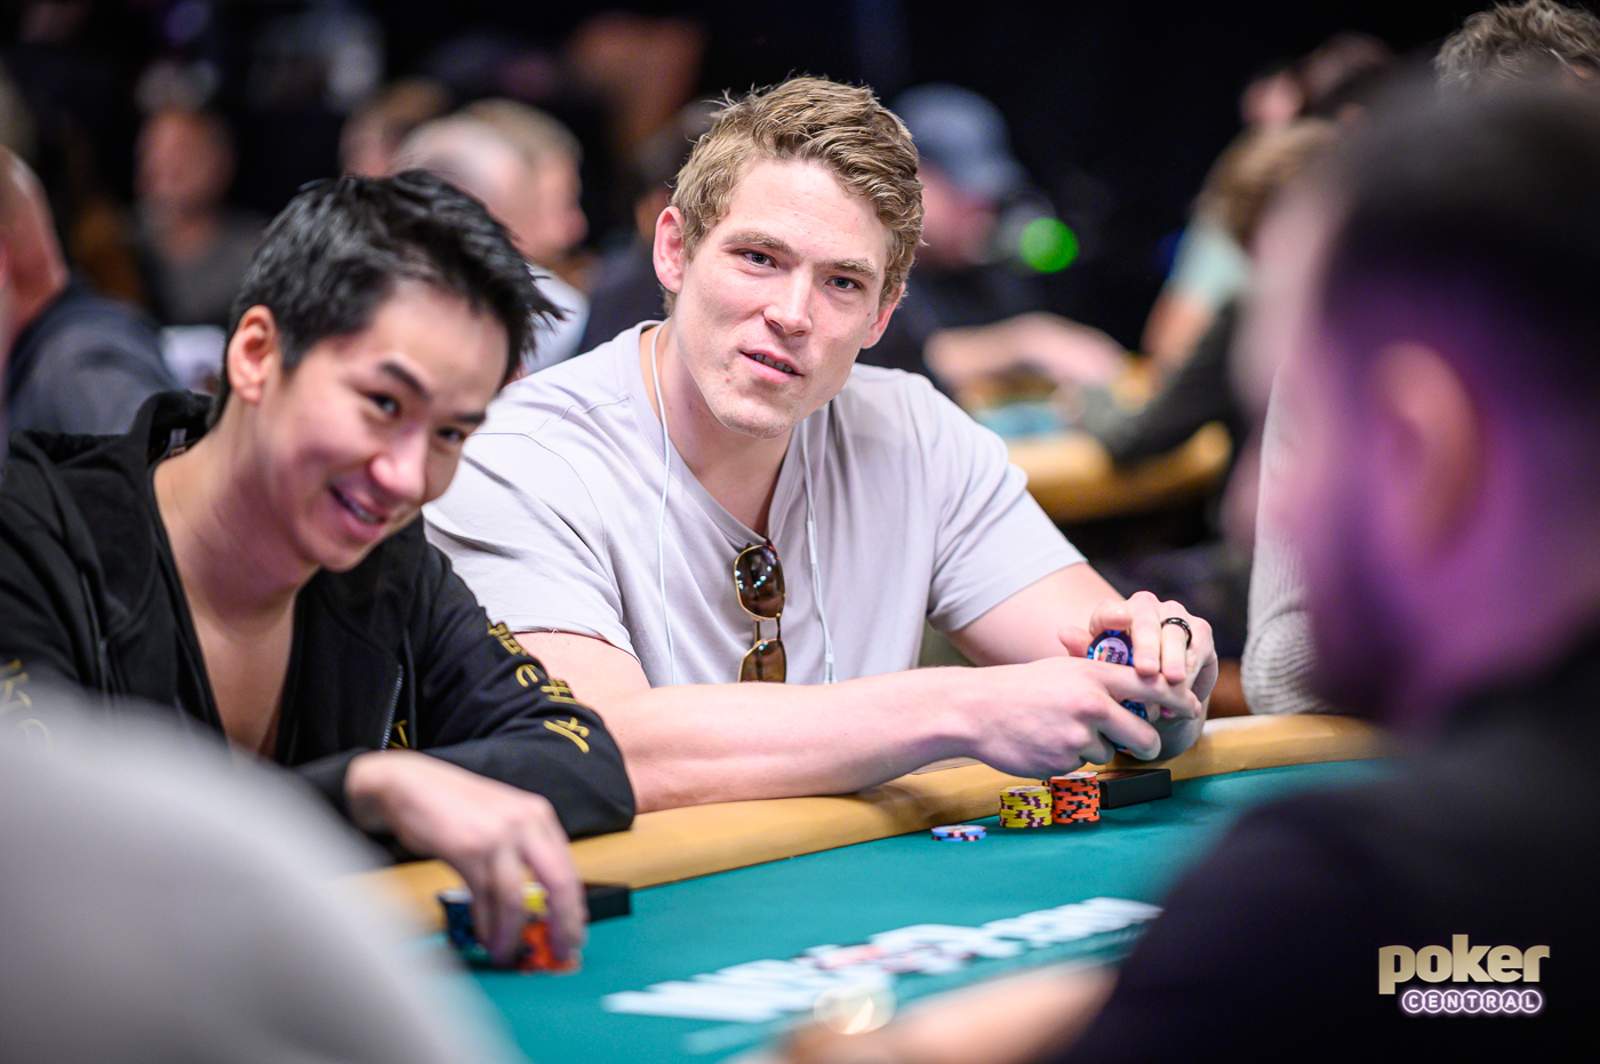 Bet on Yourself: Alex Foxen Turns $1,500 WSOP Events into Nosebleeds with Bracelet Bets